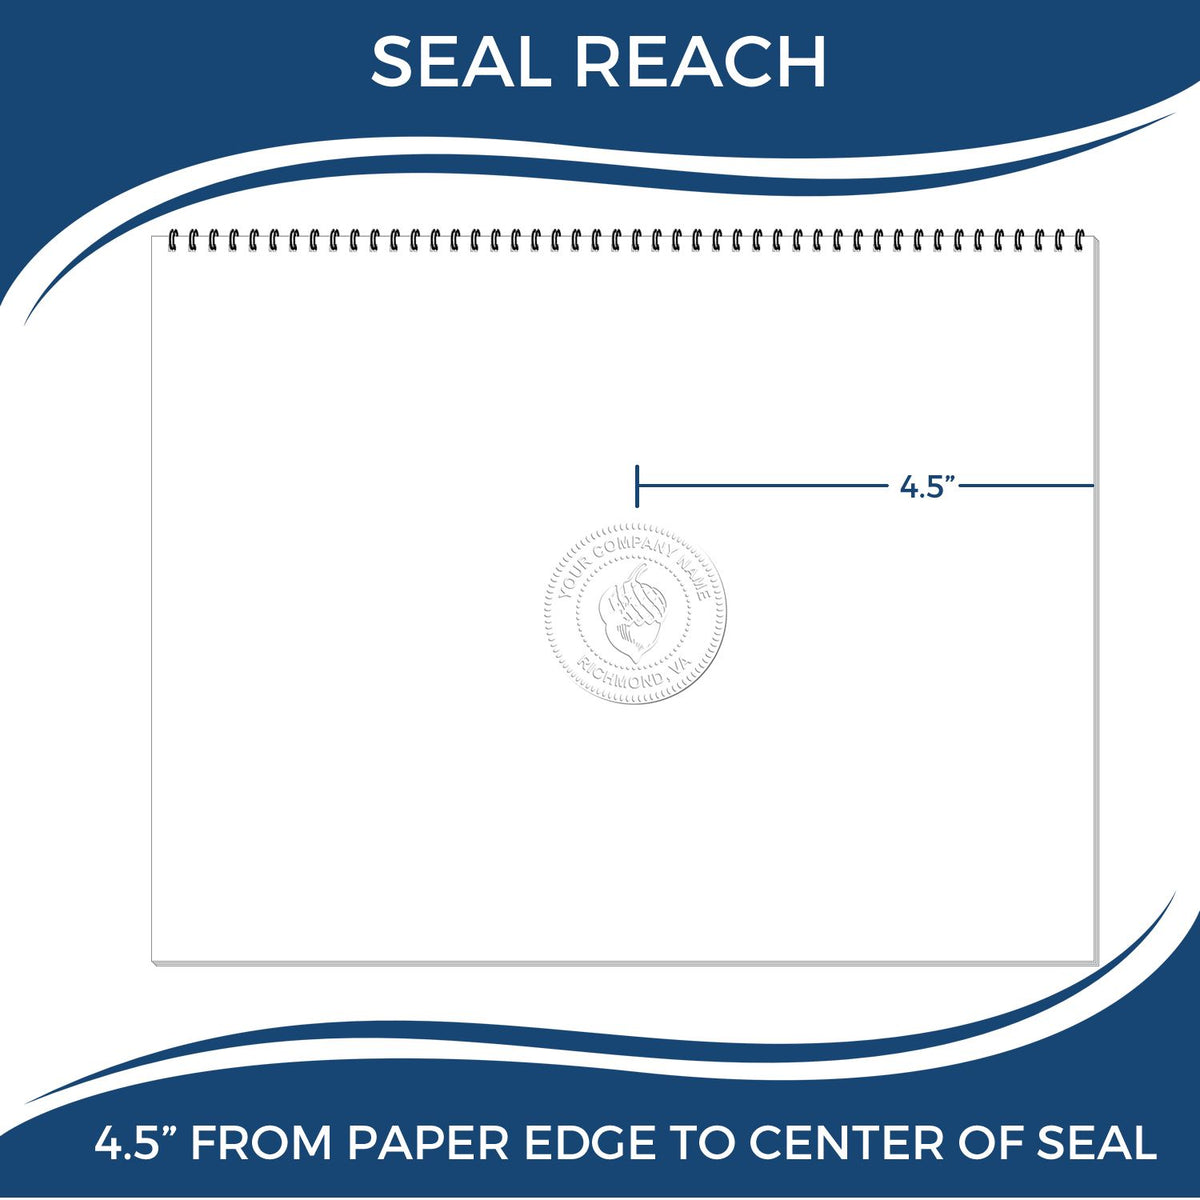 An infographic showing the seal reach which is represented by a ruler and a miniature seal image of the State of New Mexico Extended Long Reach Engineer Seal